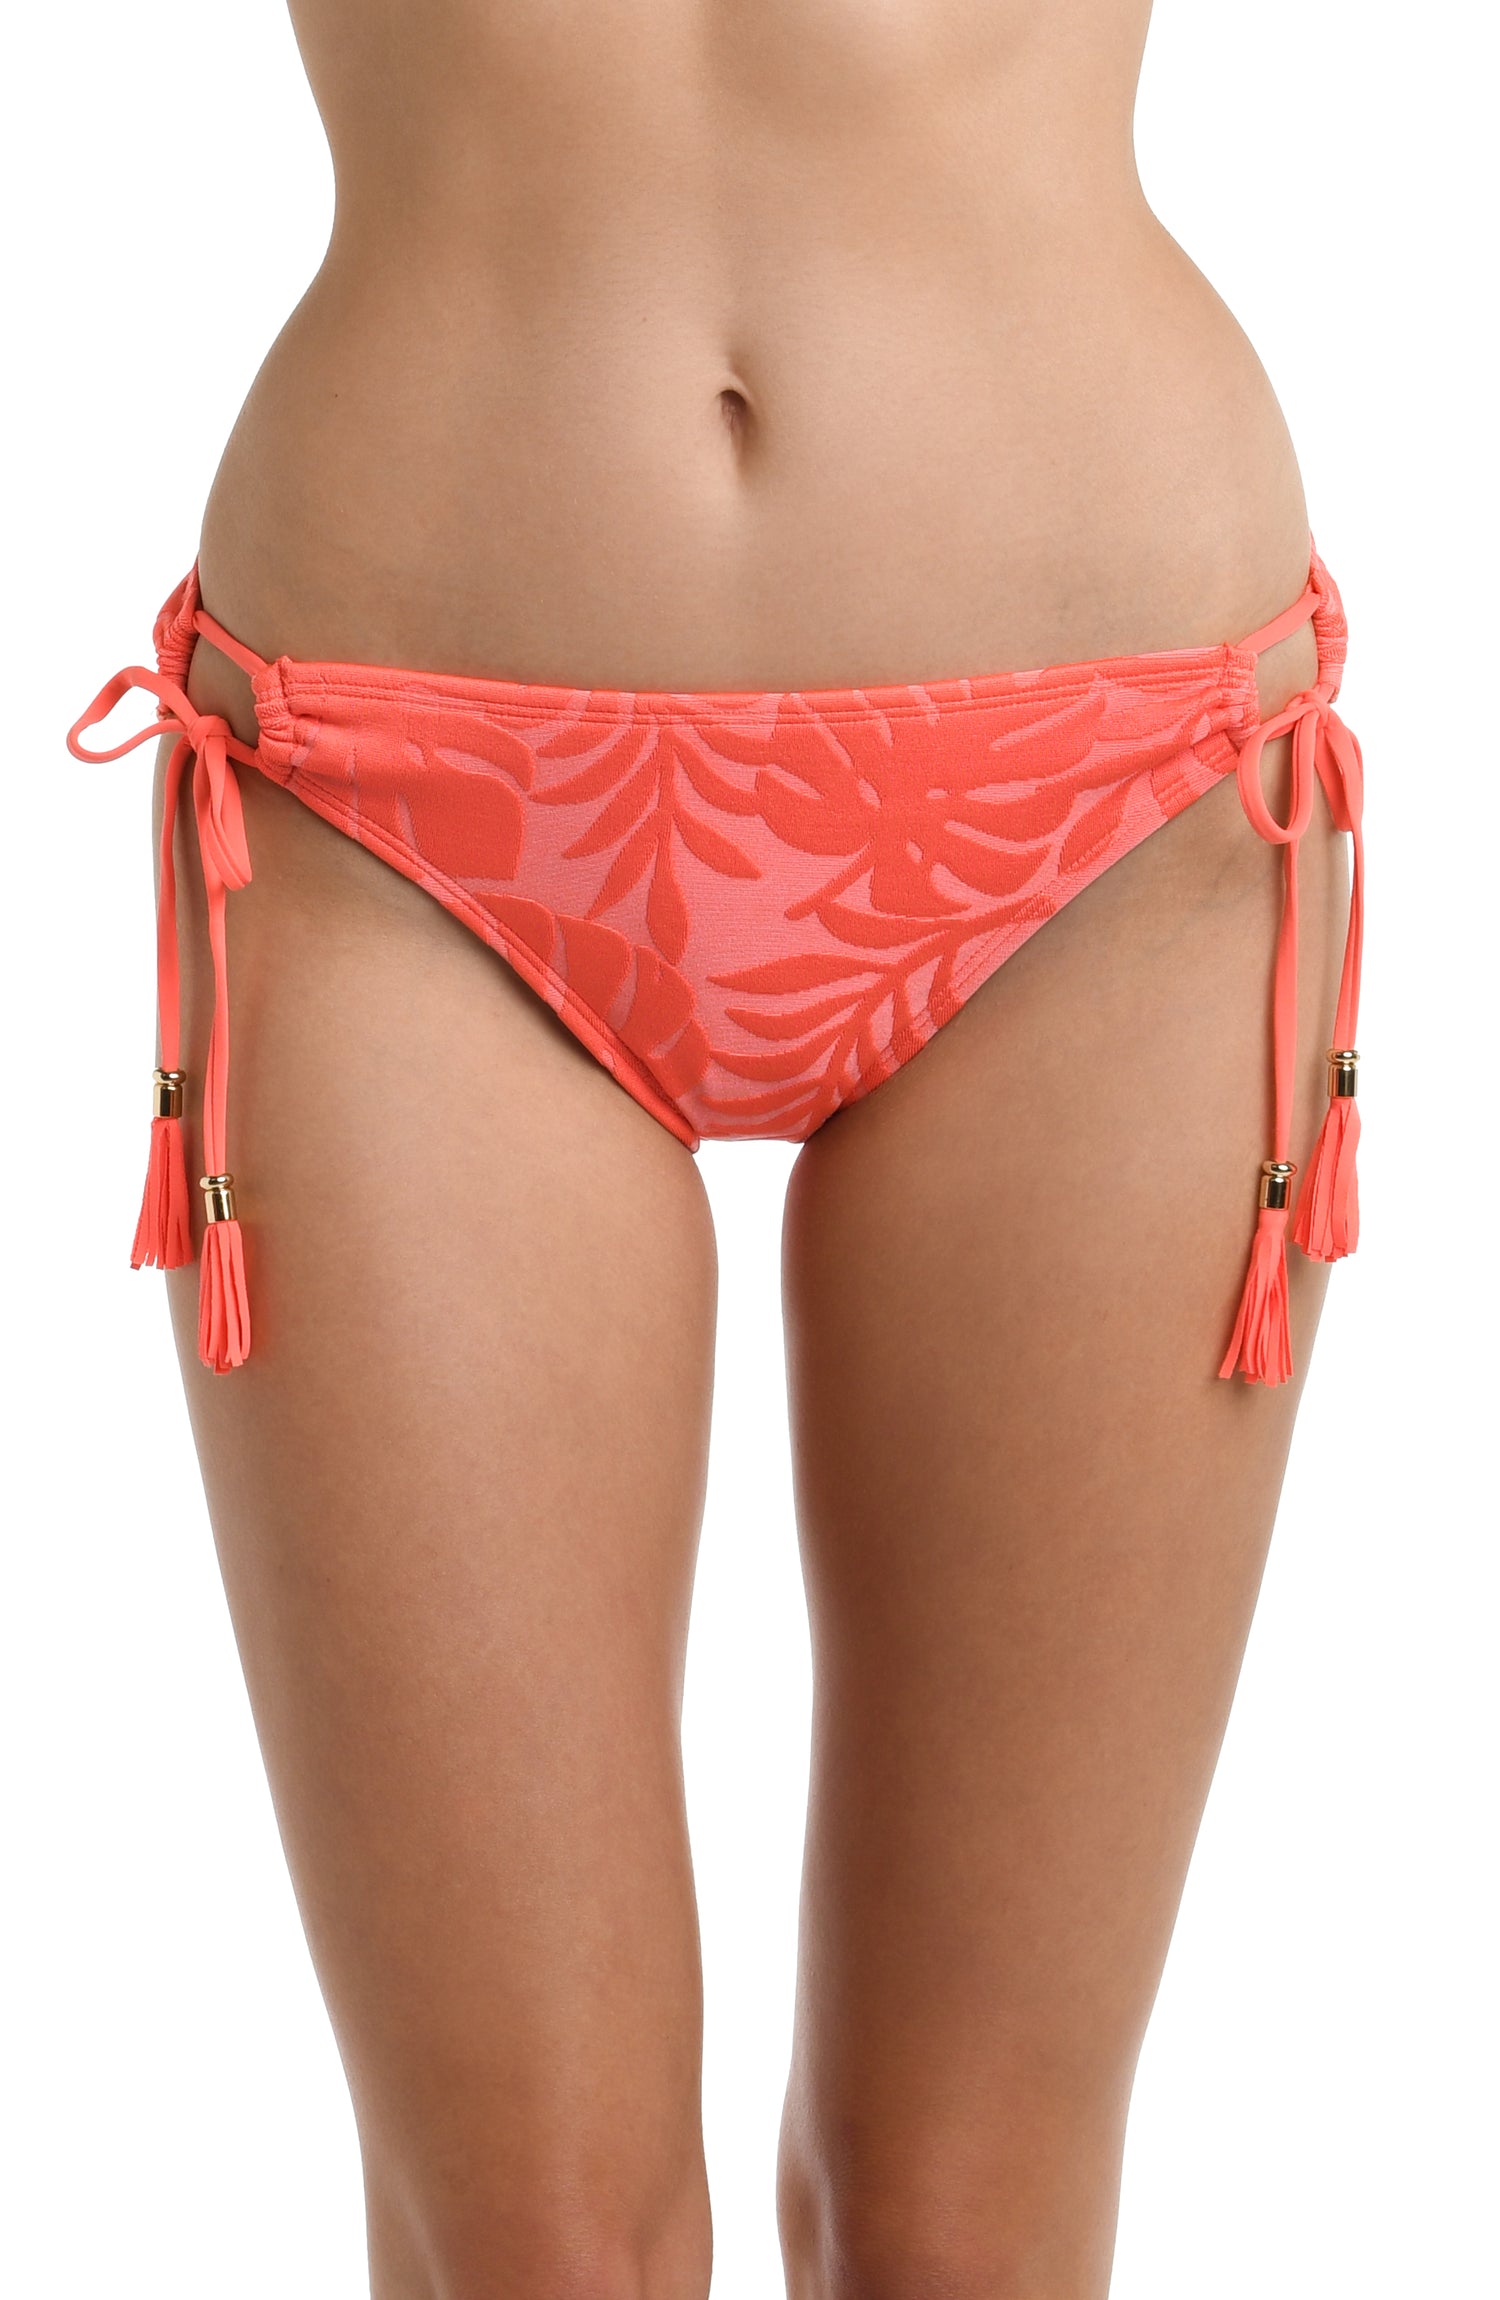 Model is wearing a coral colored palm printed Side Tie Hipster Bottom